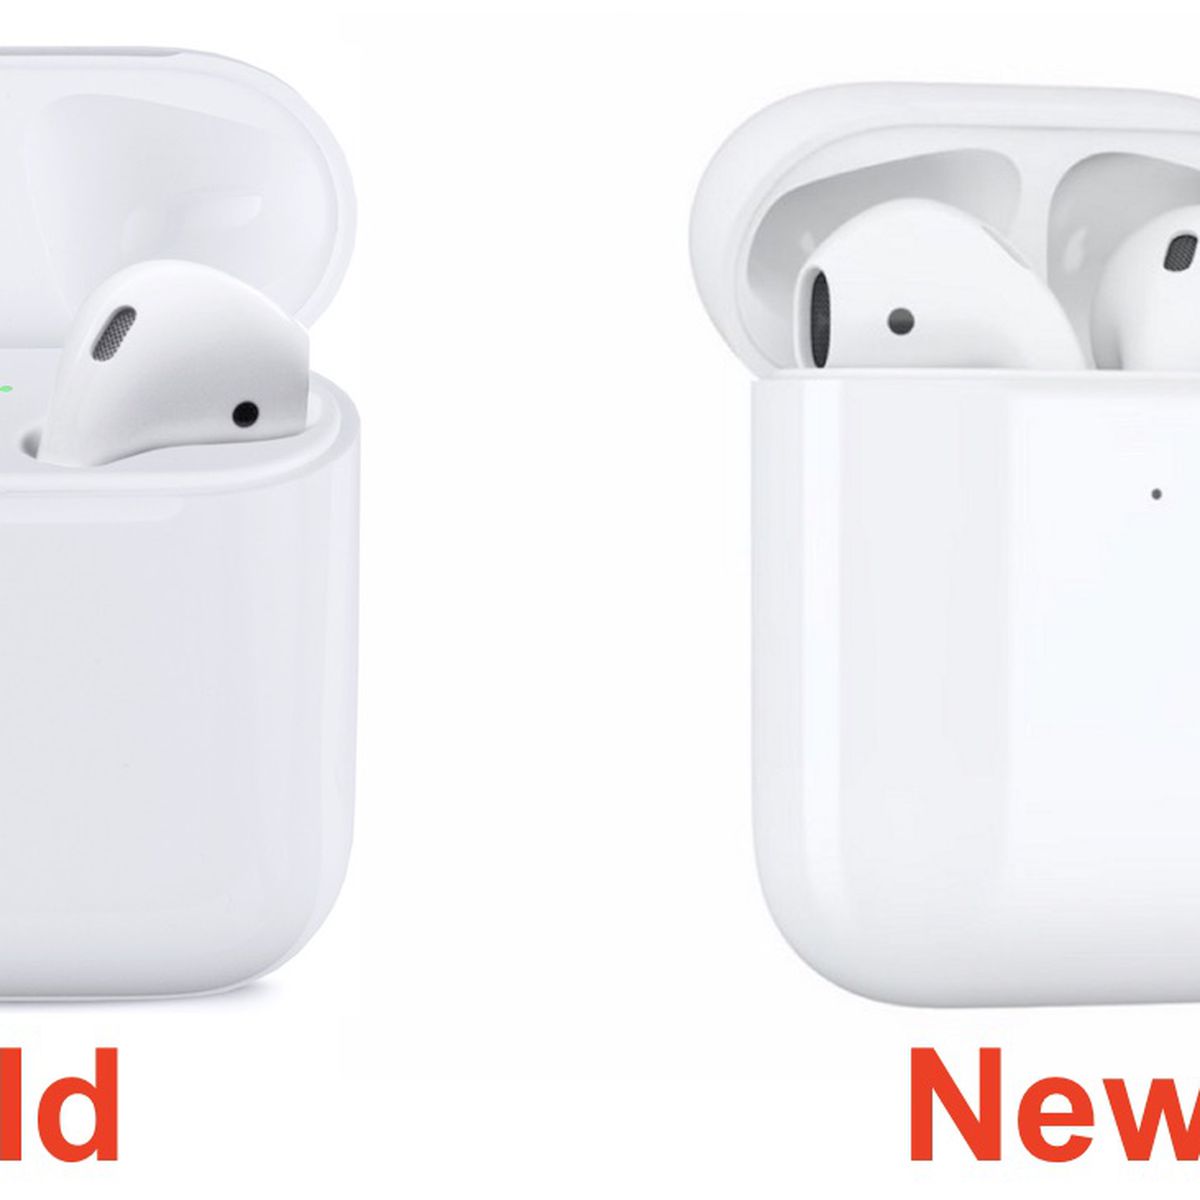 Here's First Look at the New Version Apple's AirPods - MacRumors